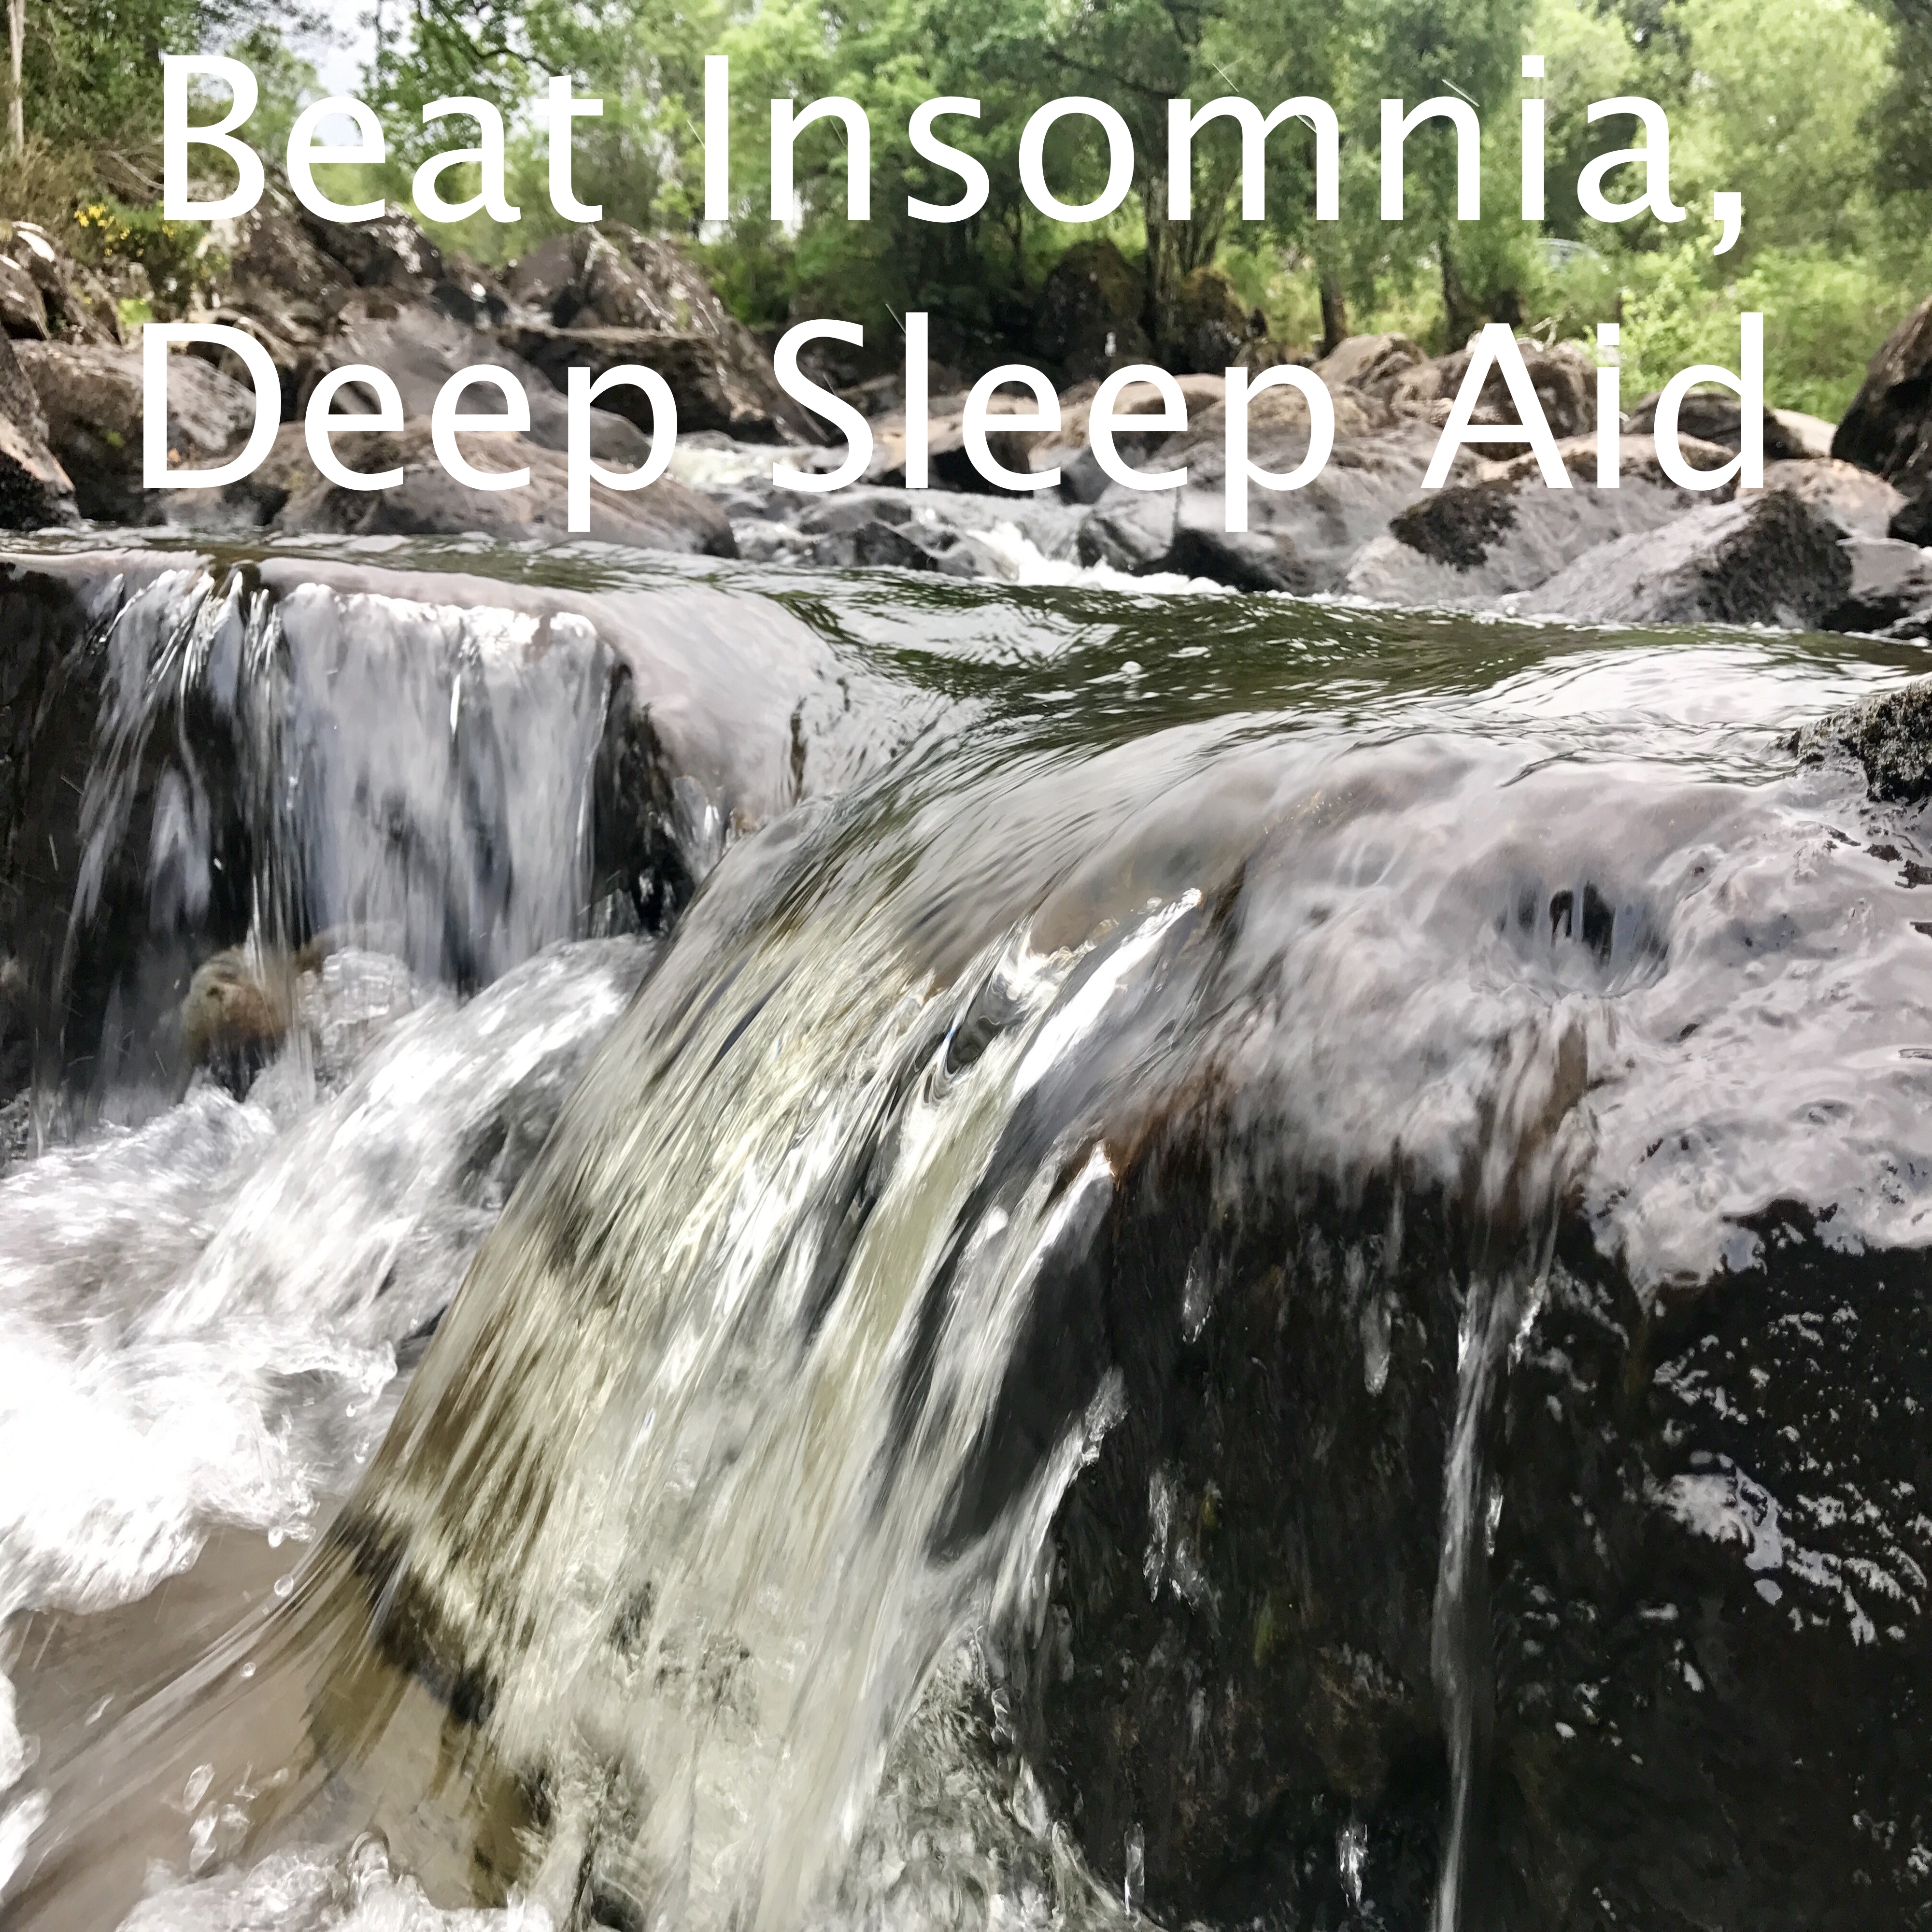 15 Sleep Rain Sounds to Beat Insomnia, Cure Sleep Problems, Rain, White Noise, Pink Noise, Nature Sounds, Thunderstorms